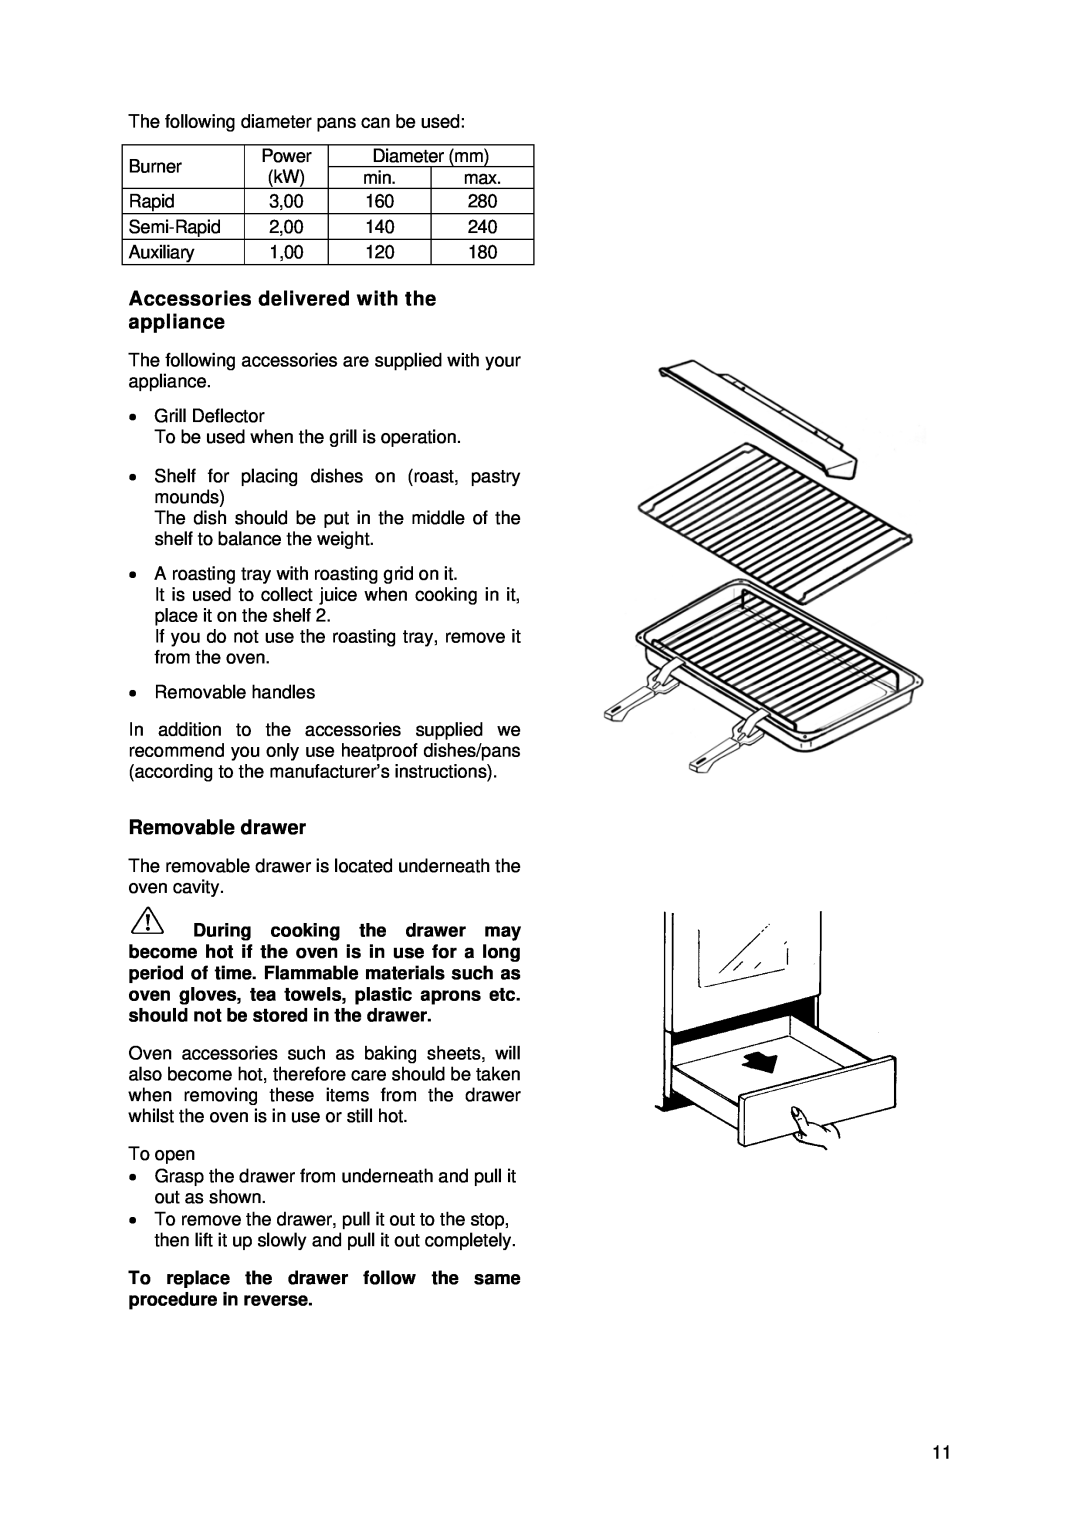 Tricity Bendix SIG 233/1 installation instructions Accessories delivered with the appliance, Removable drawer 